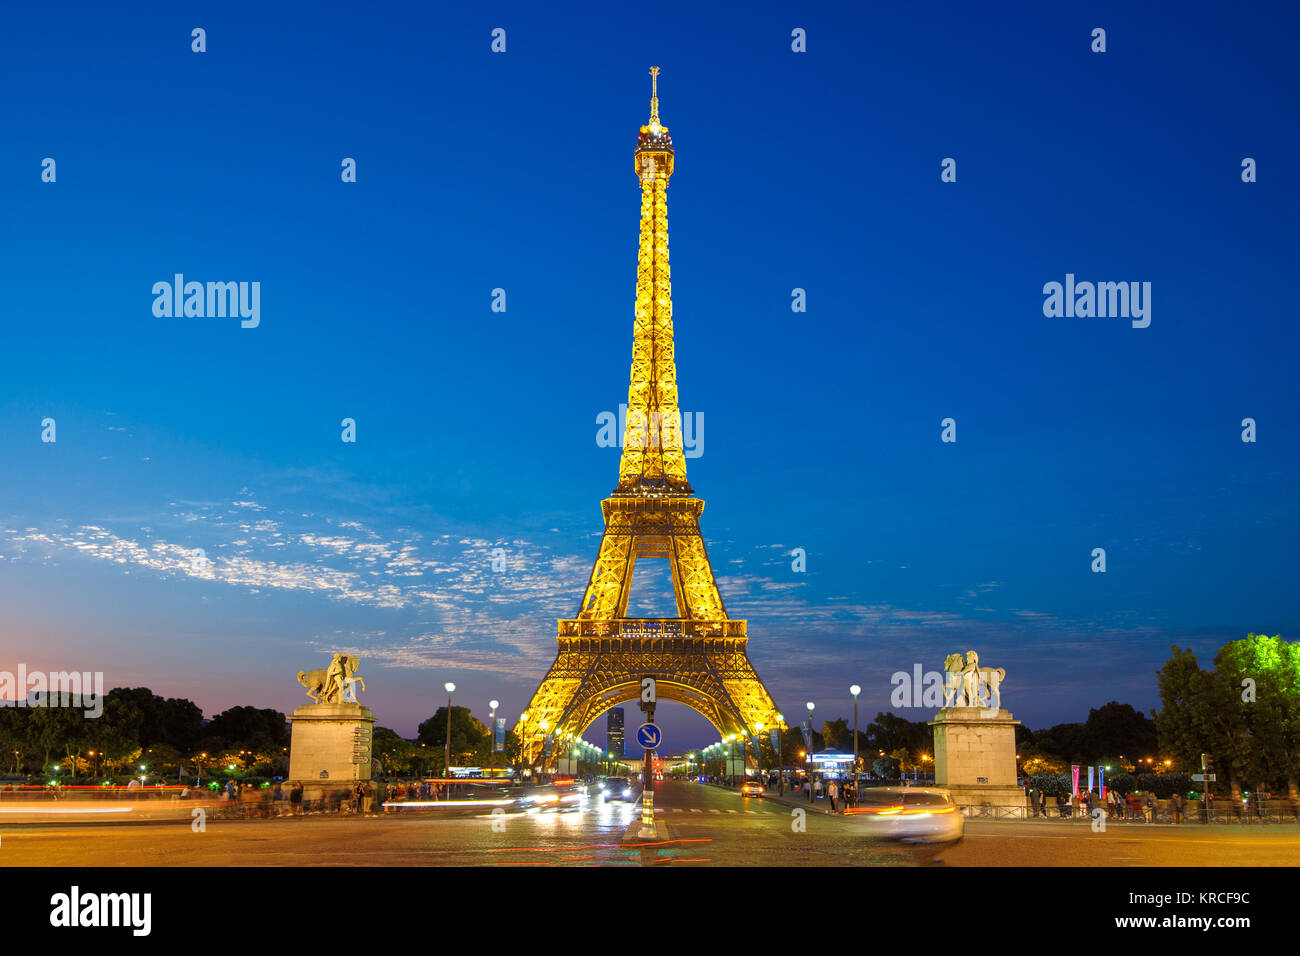 Night view of Eiffel Tower in Paris, France Stock Photo